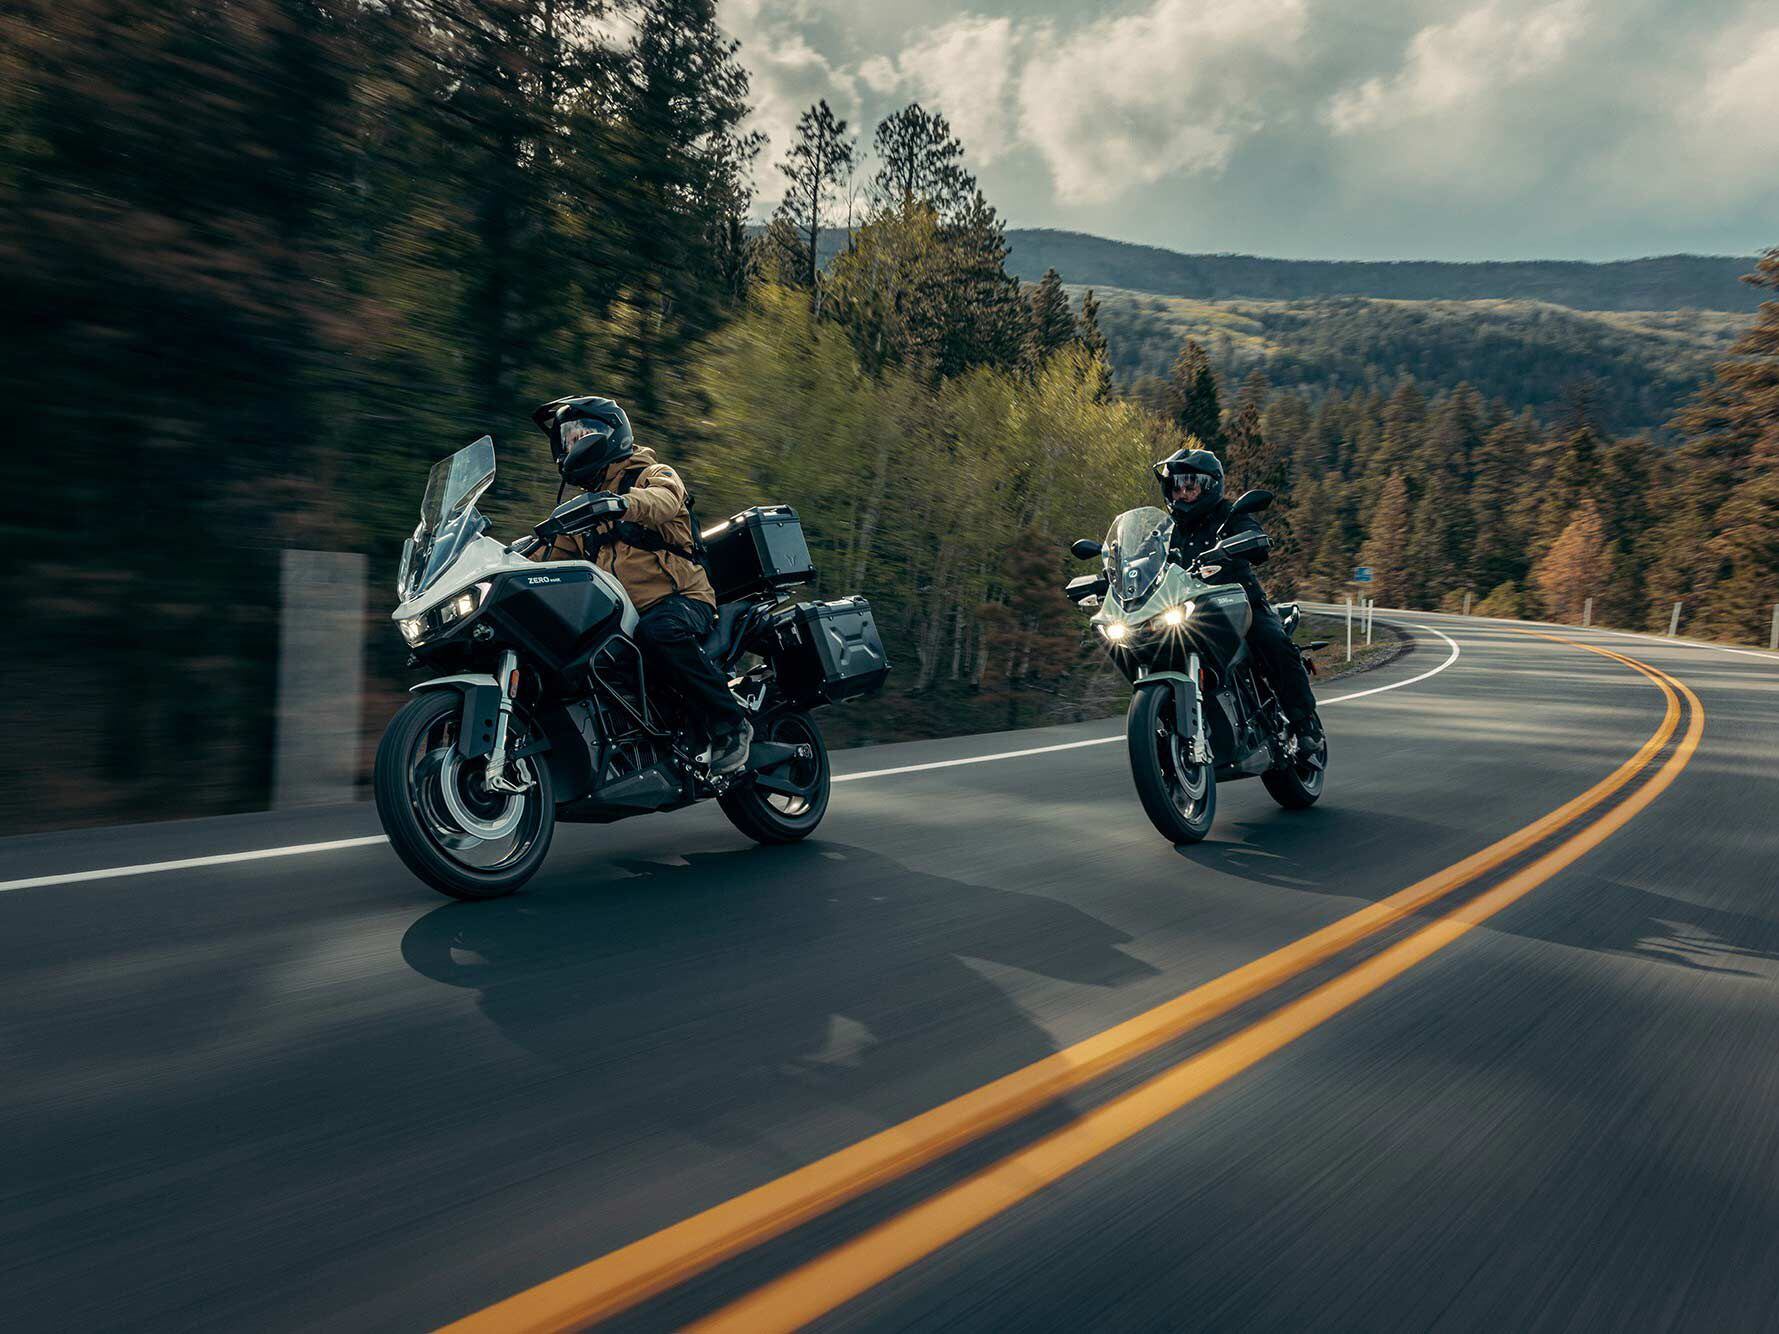 Zero Motorcycles has entered the full-size ADV market with the brand-new DSR/X.